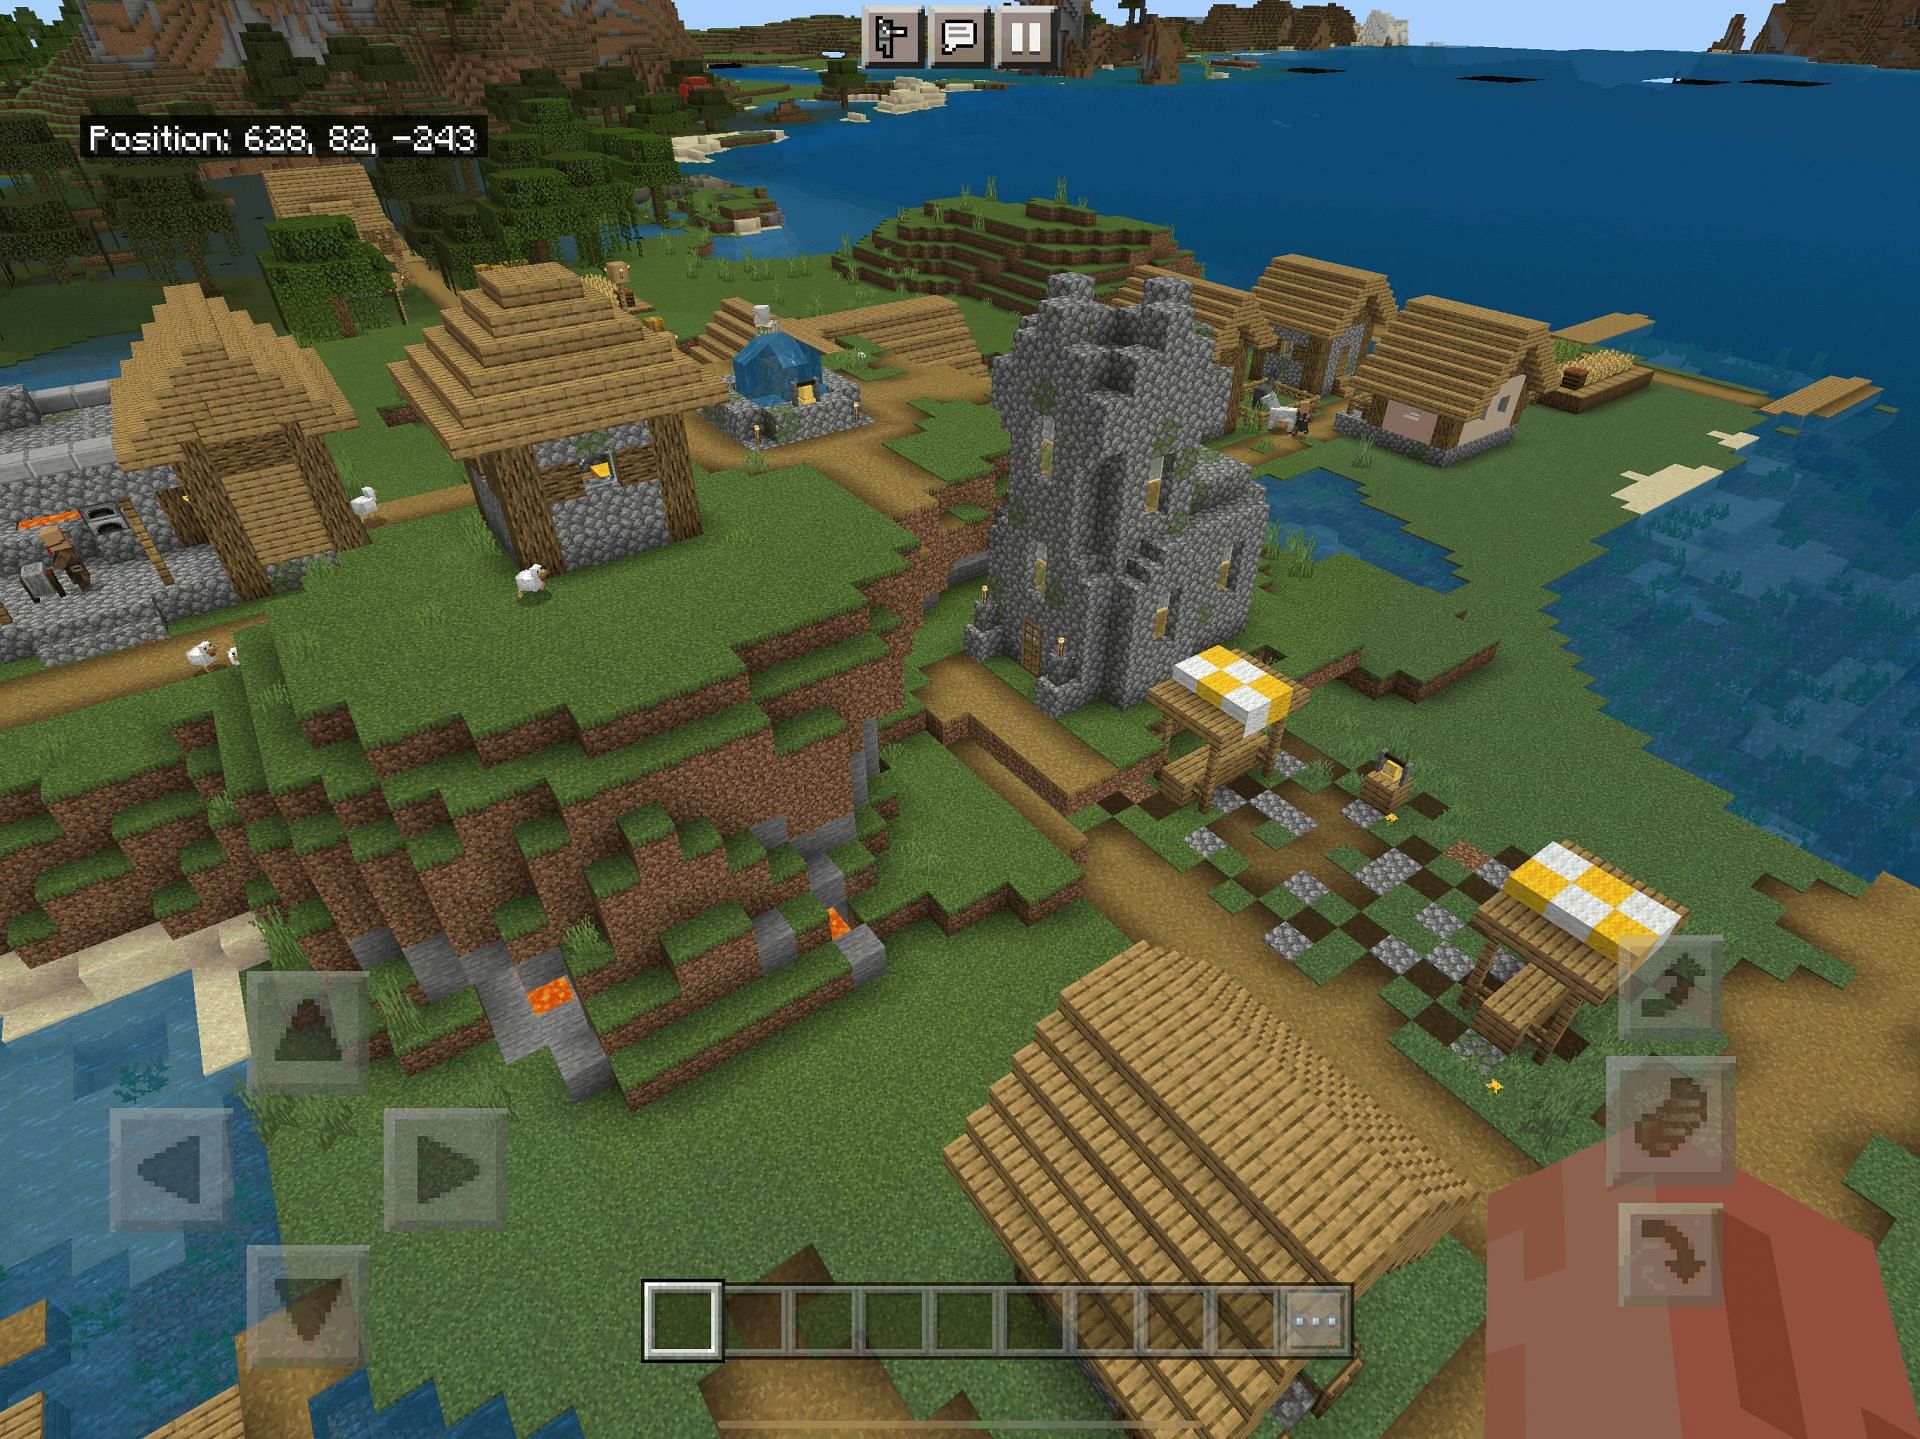 The village that players spawn in (Image via Mojang, Minecraft)